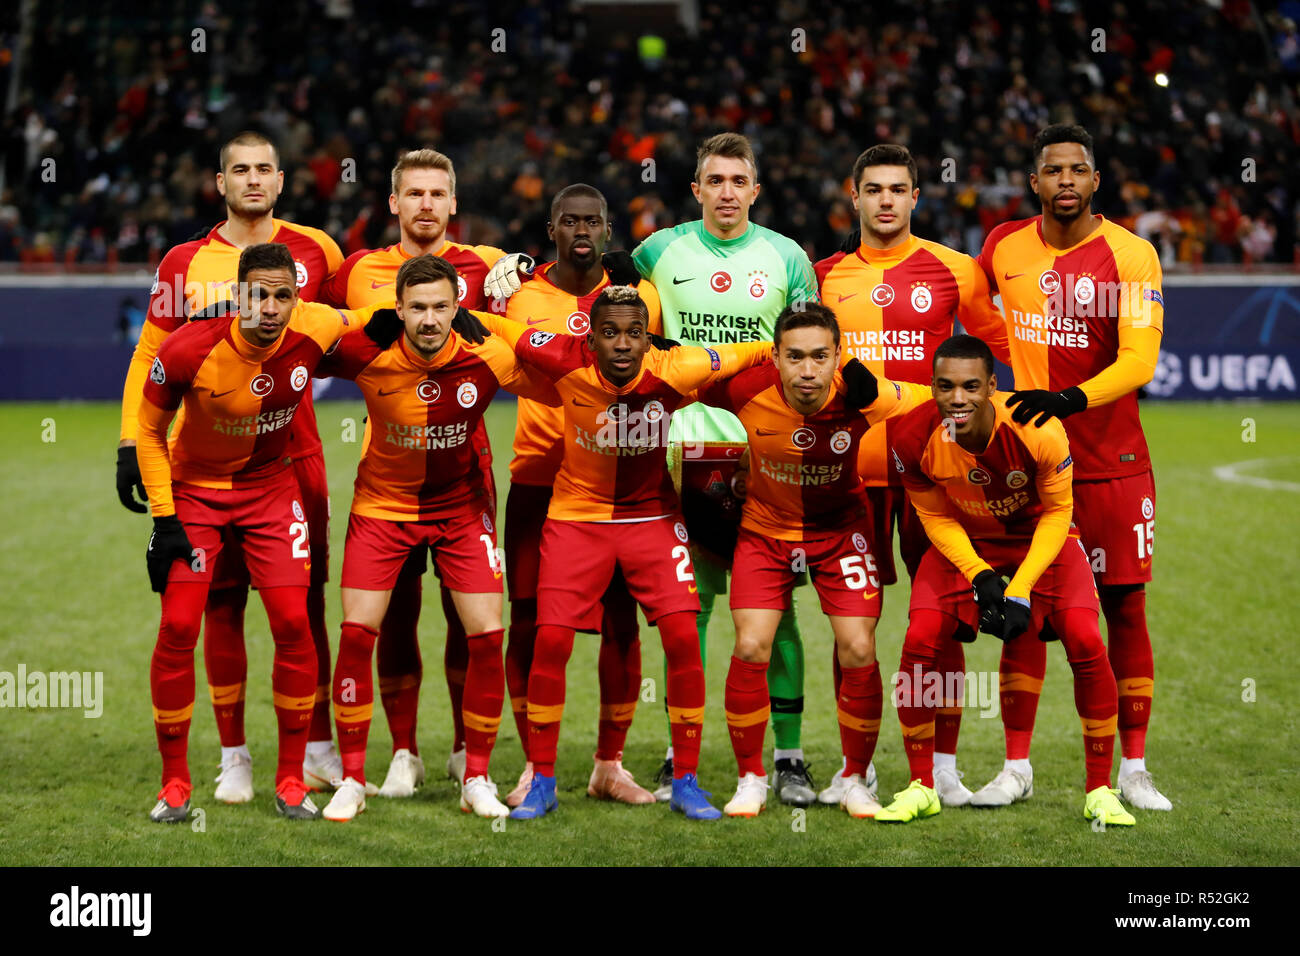 MOSCOW, RUSSIA - NOVEMBER 28: Galatasaray players pose for a photo during the Group D match of the UEFA Champions League between FC Lokomotiv Moscow and Galatasaray at Lokomotiv Stadium on November 28, 2018 in Moscow, Russia. (MB Media) Stock Photo